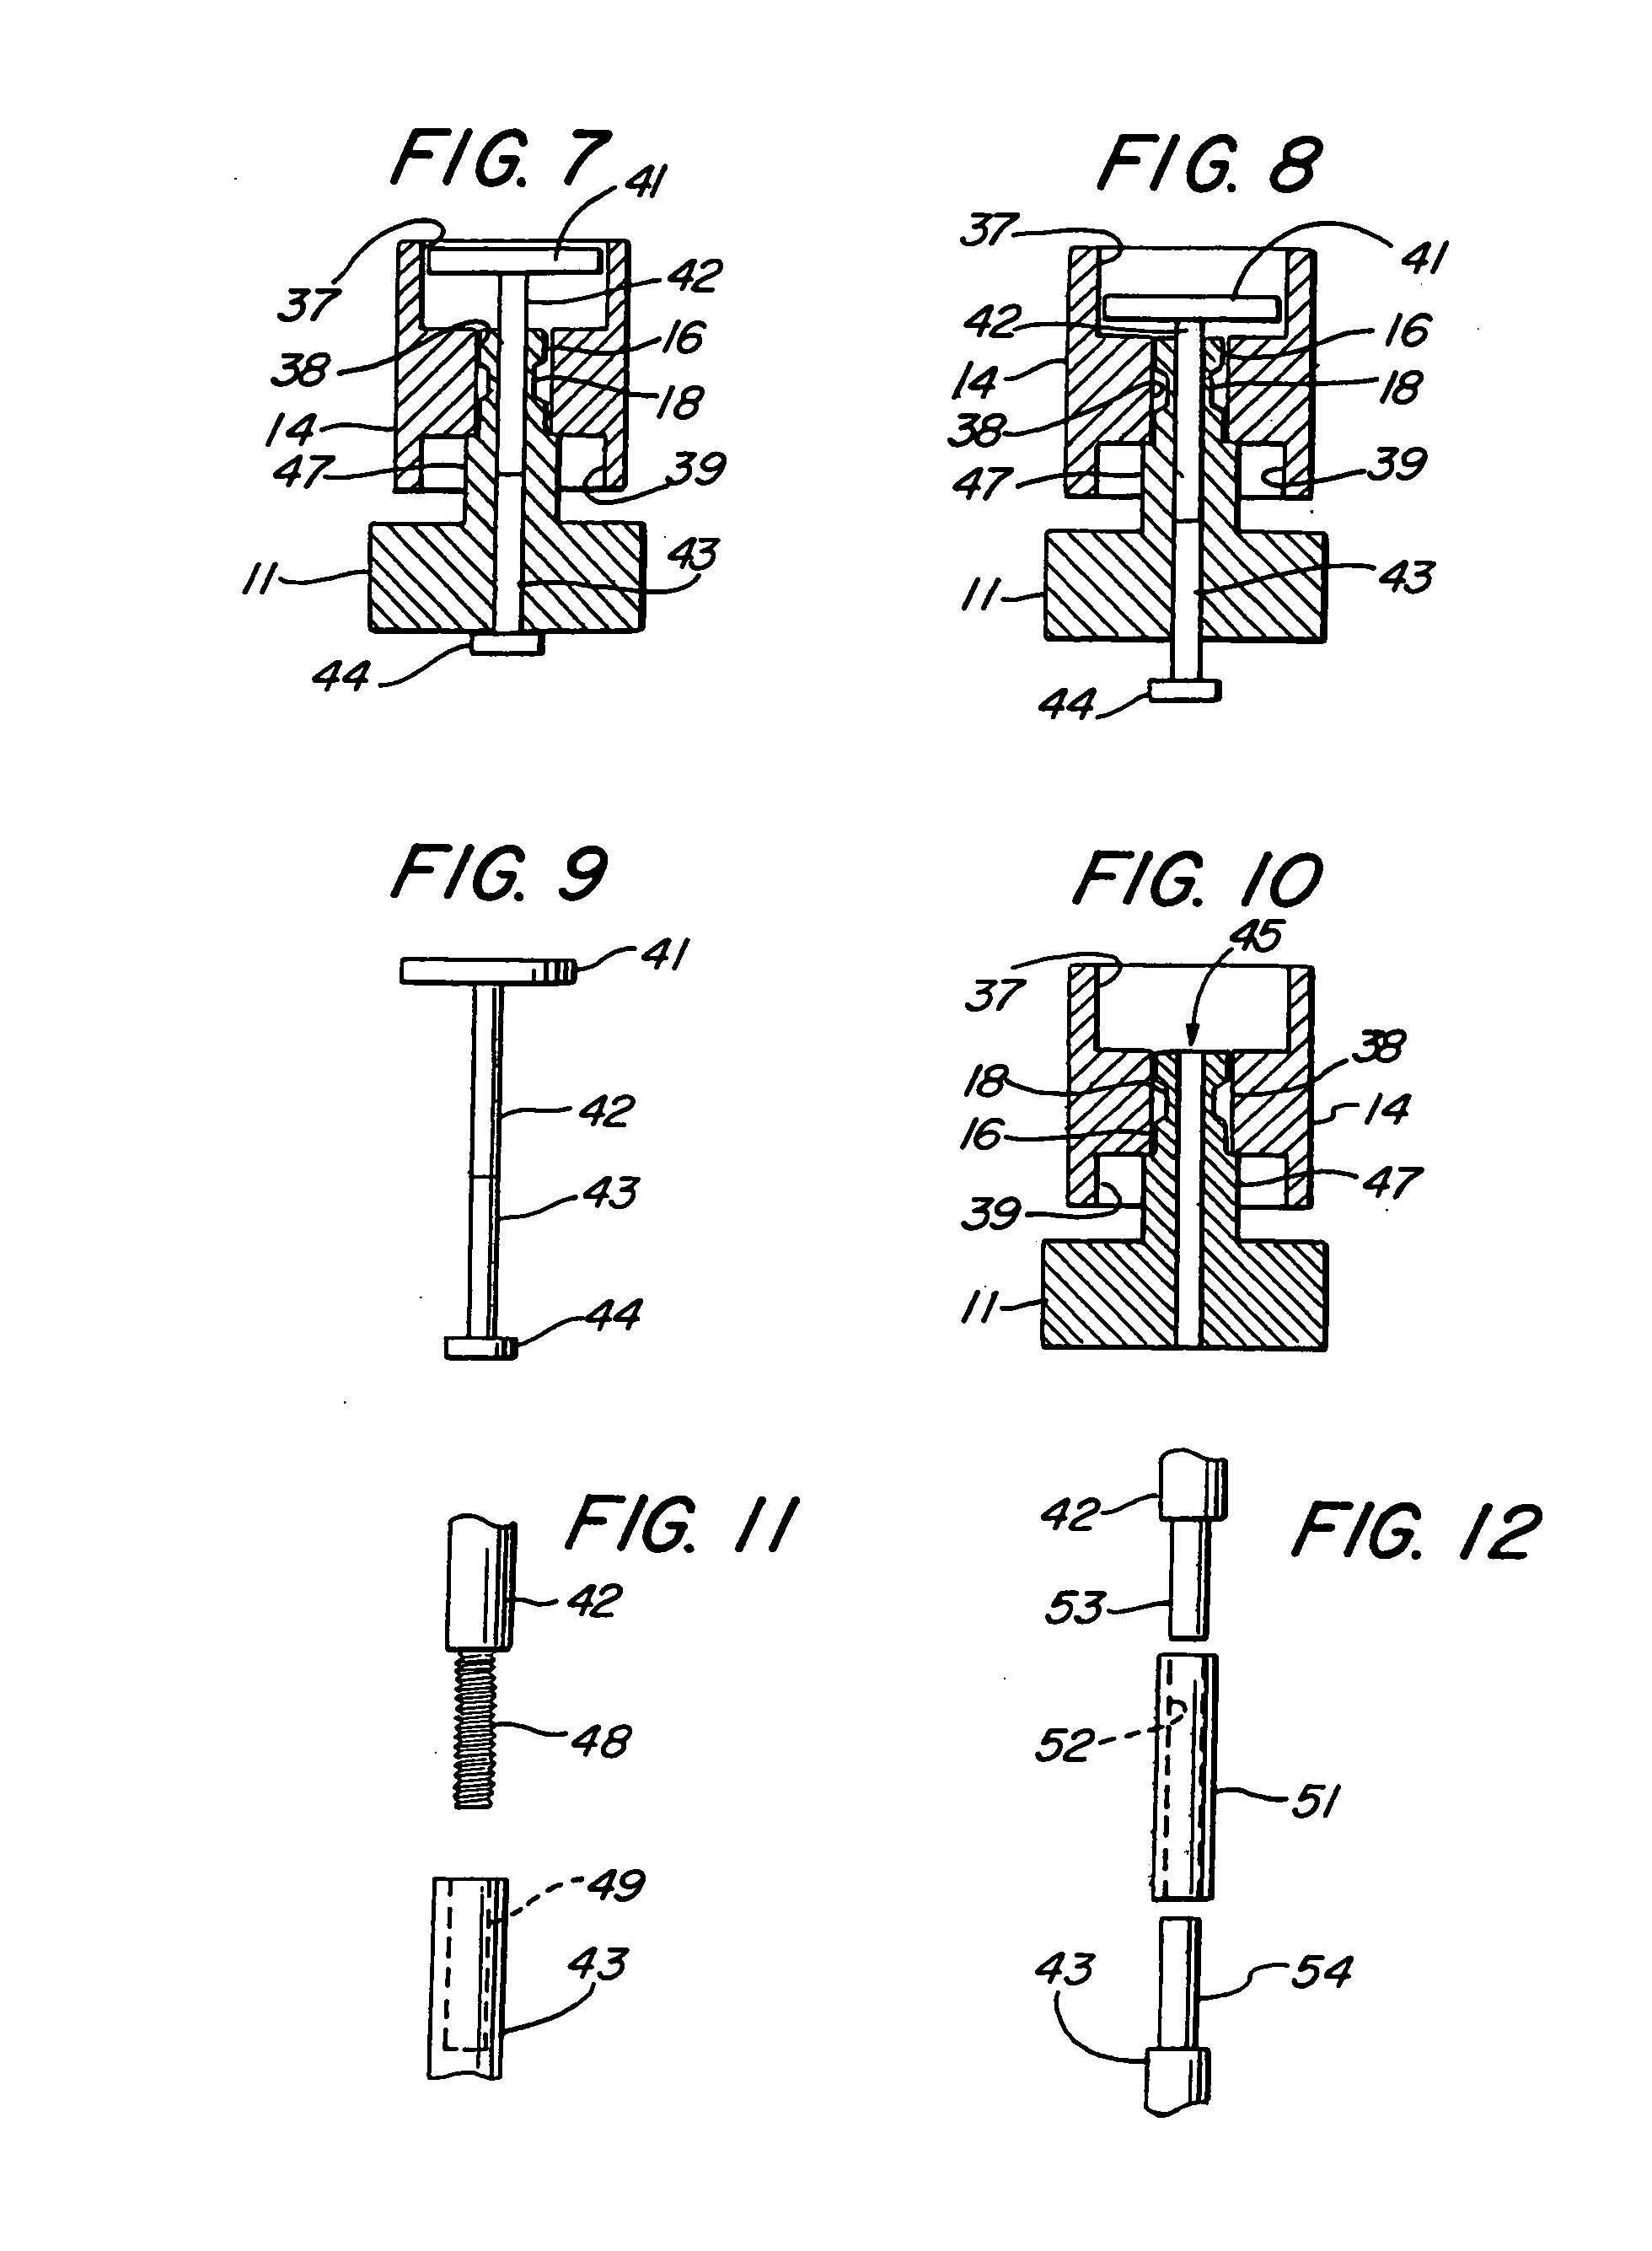 Multi-functional control assembly for use in electric guitars